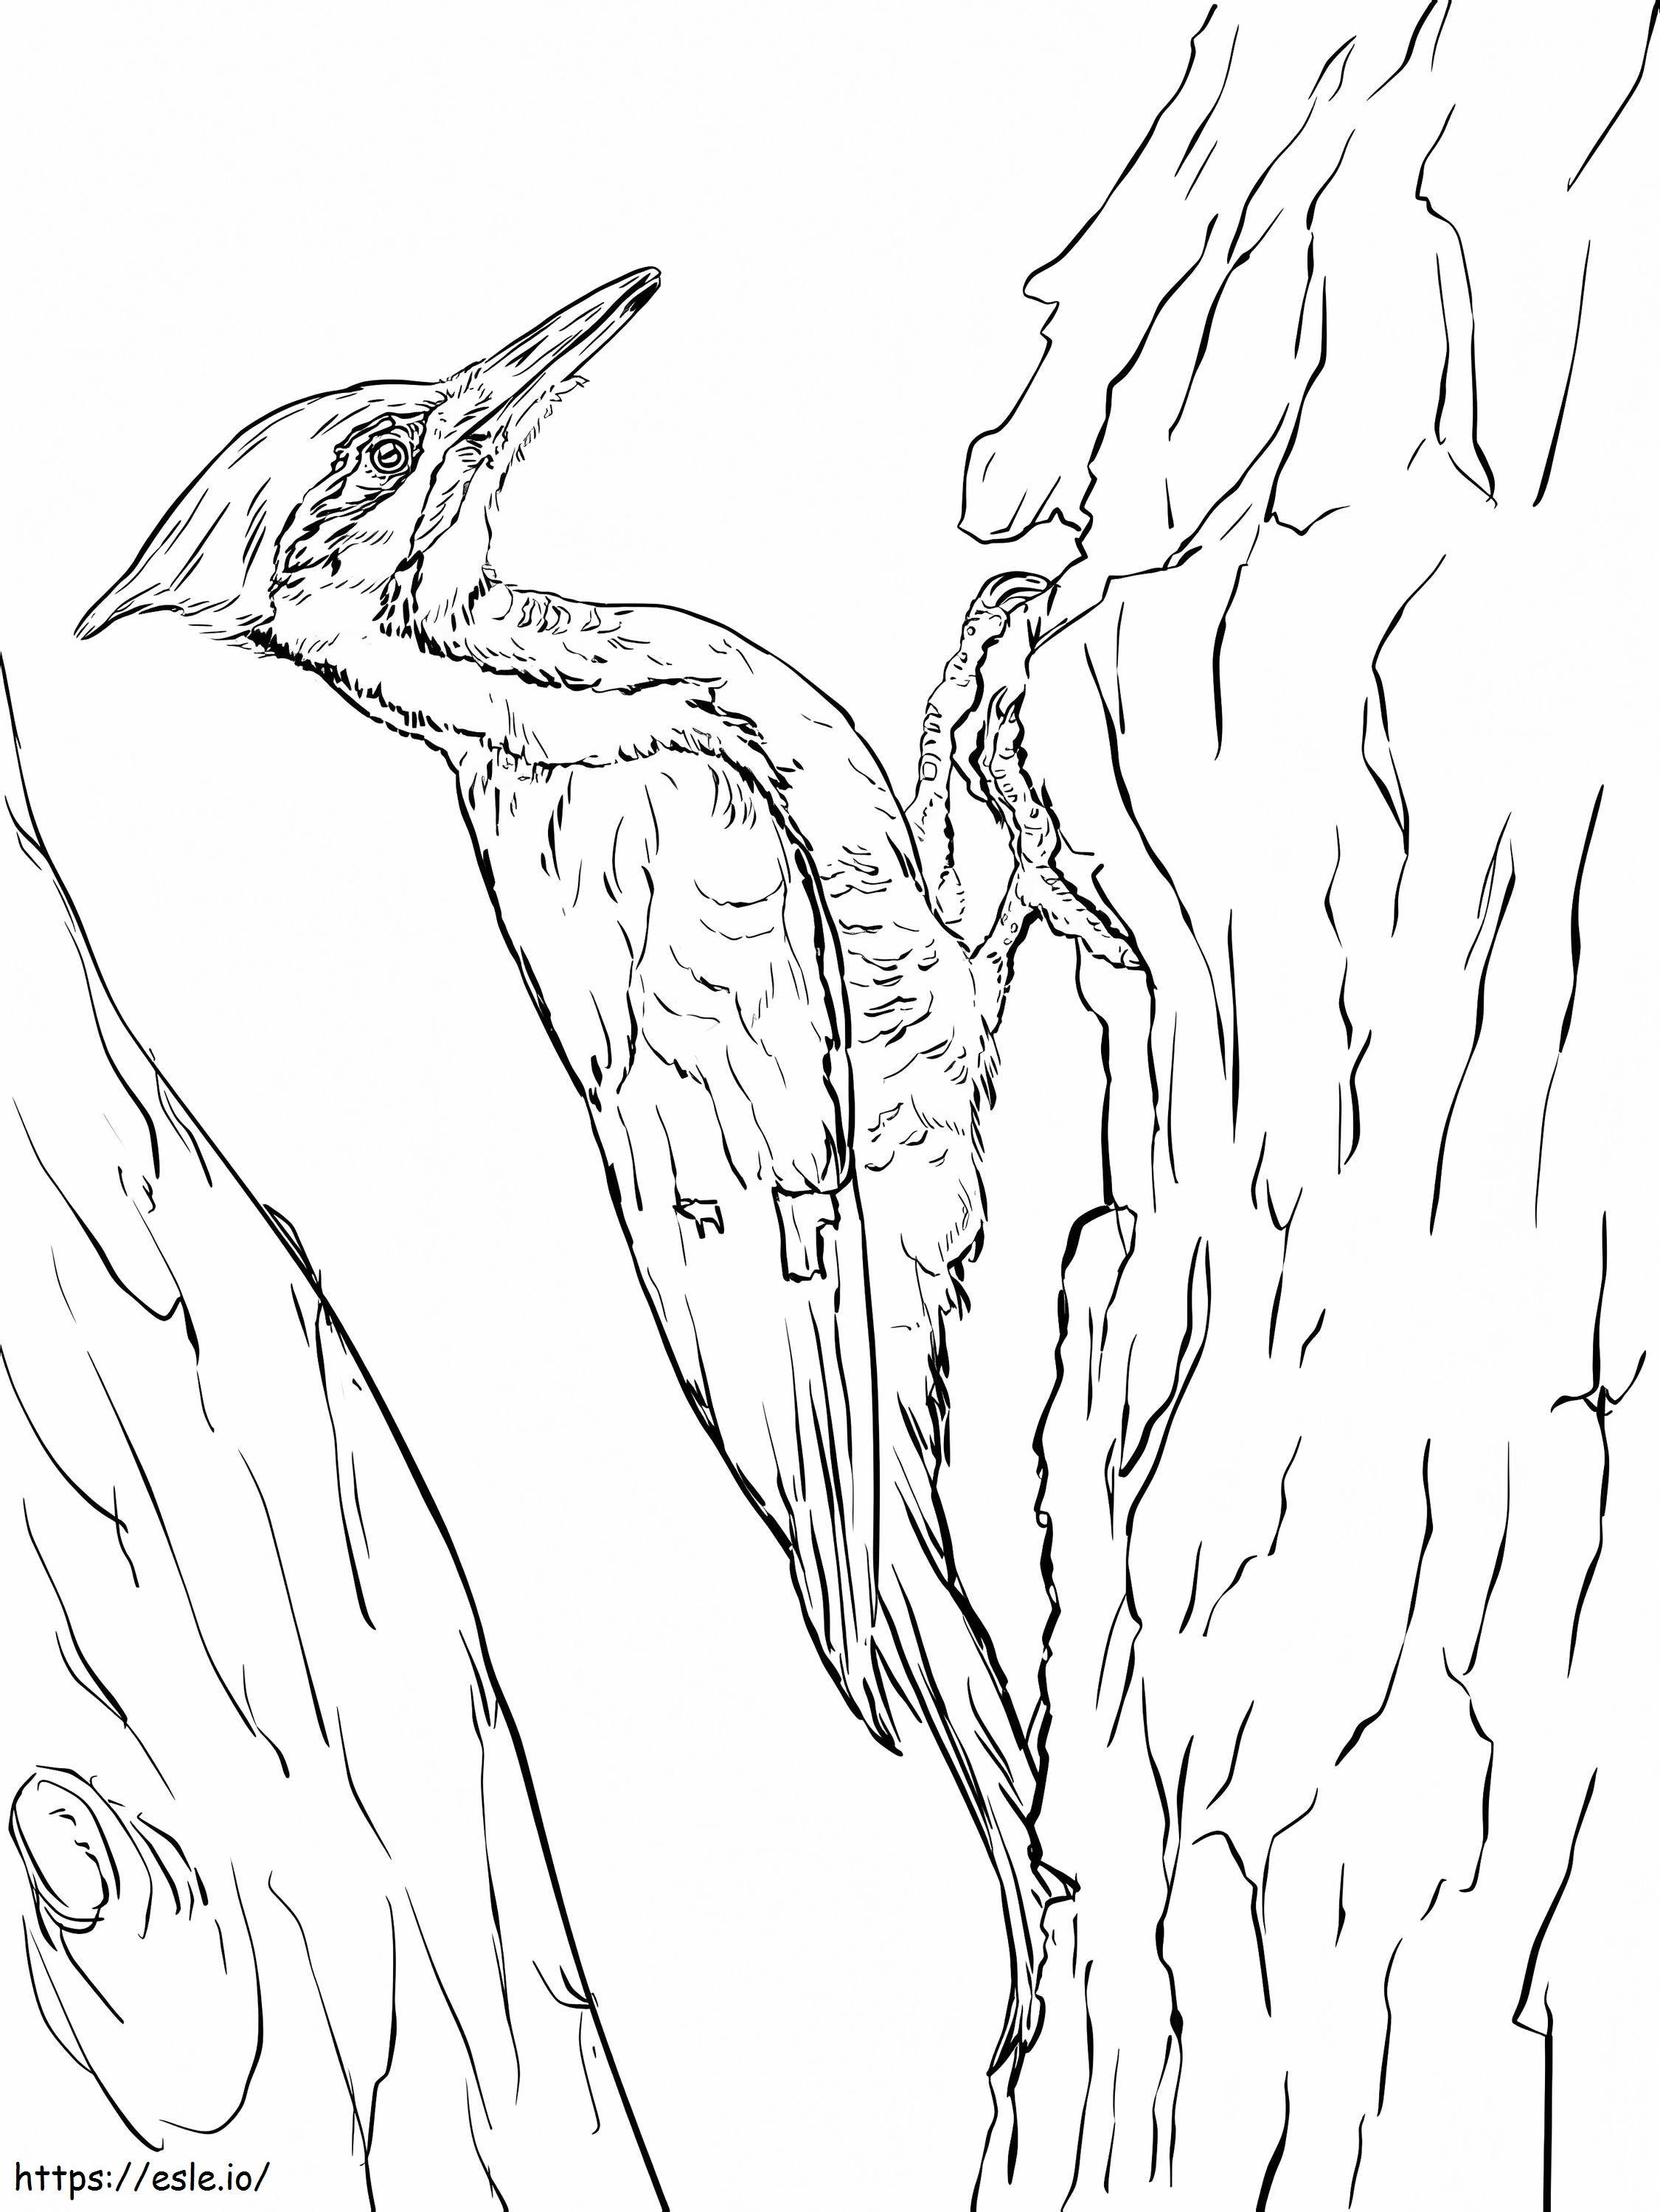 Pileated Woodpecker 2 coloring page